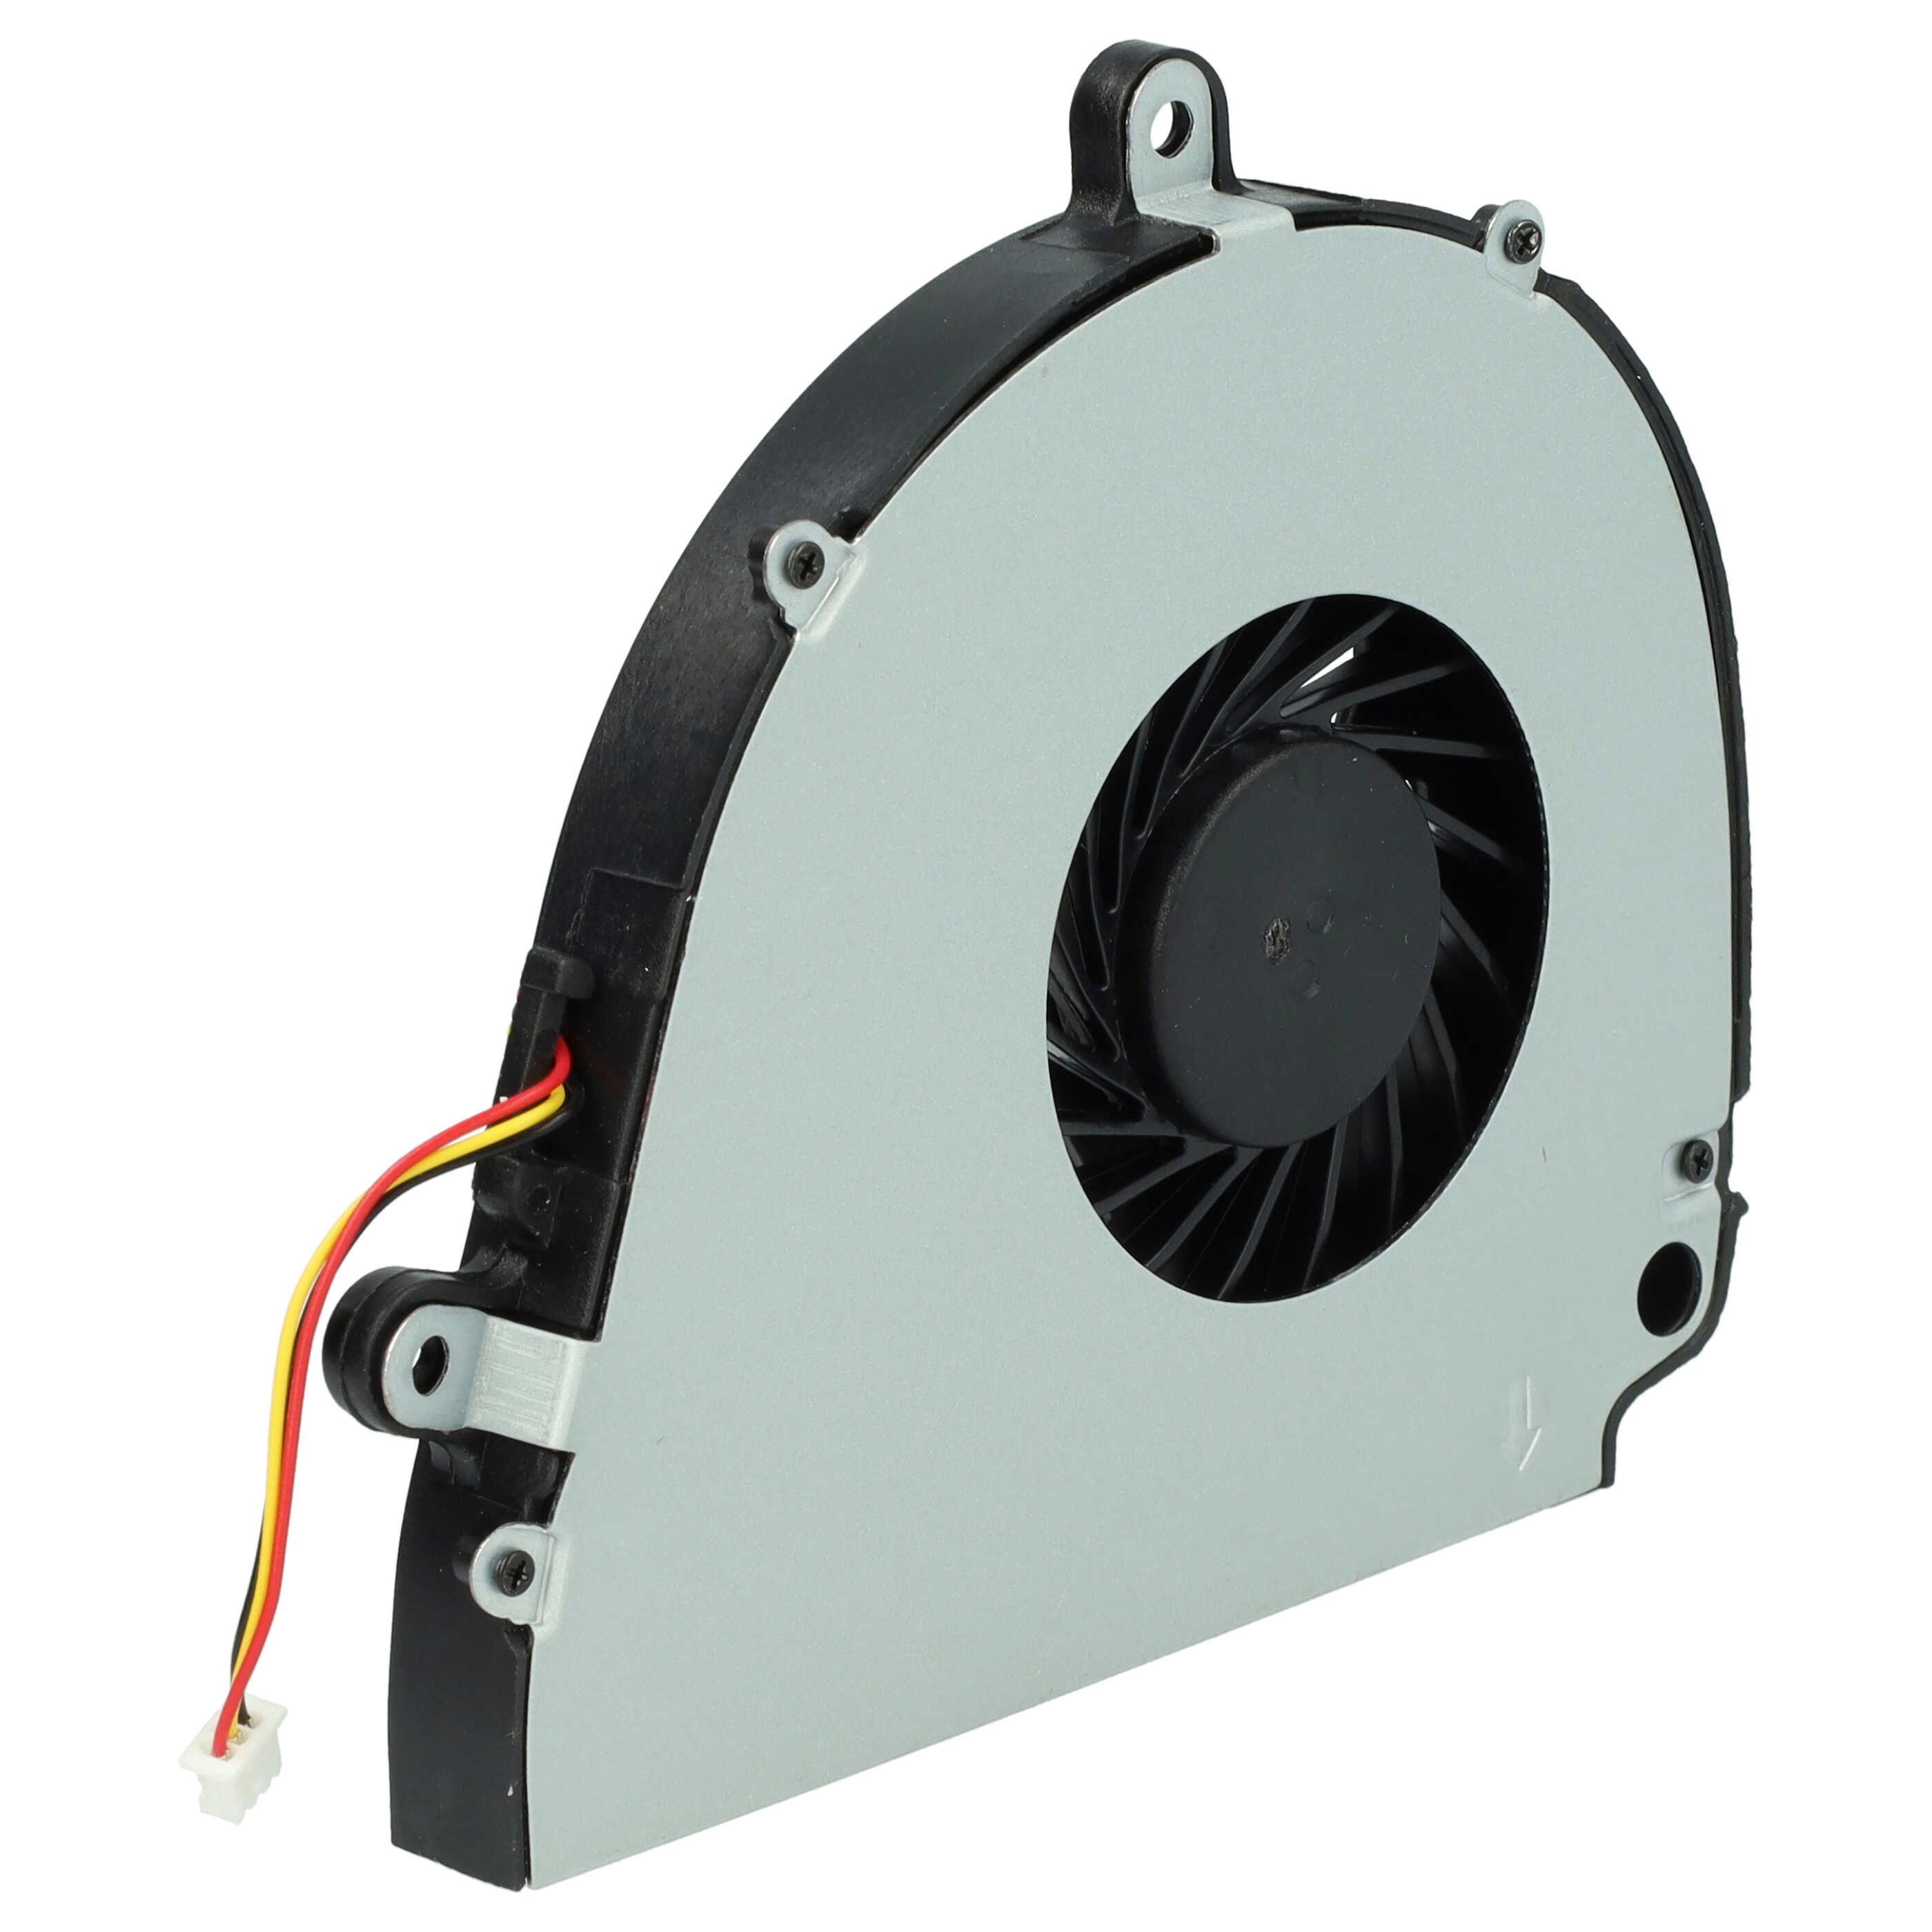 CPU / GPU Fan suitable for Acer Aspire V3-571G Notebook 91 x 84 x 11 mm